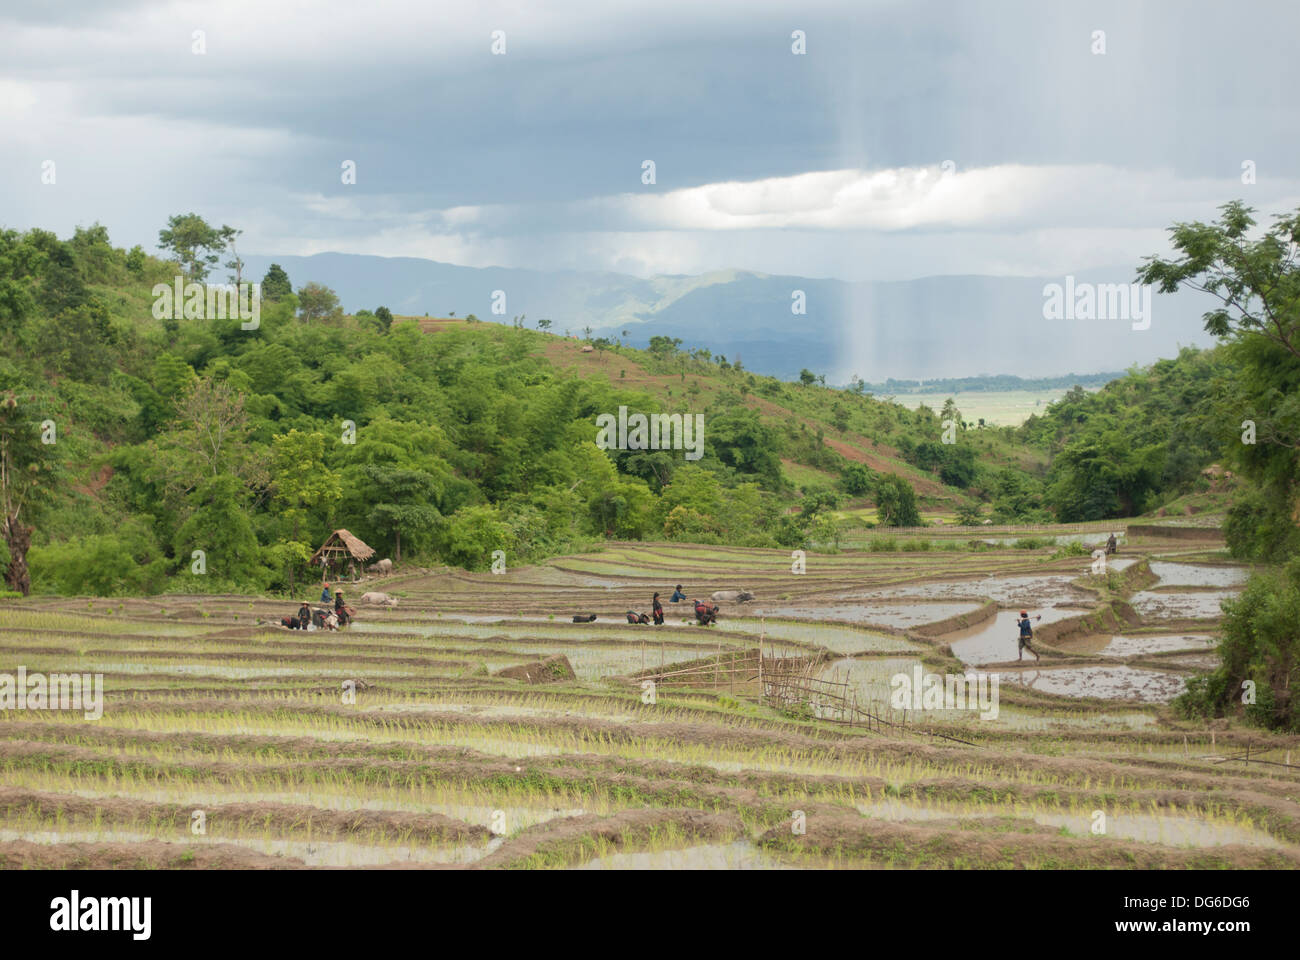 Local people working on paddy fields before rain starts Stock Photo